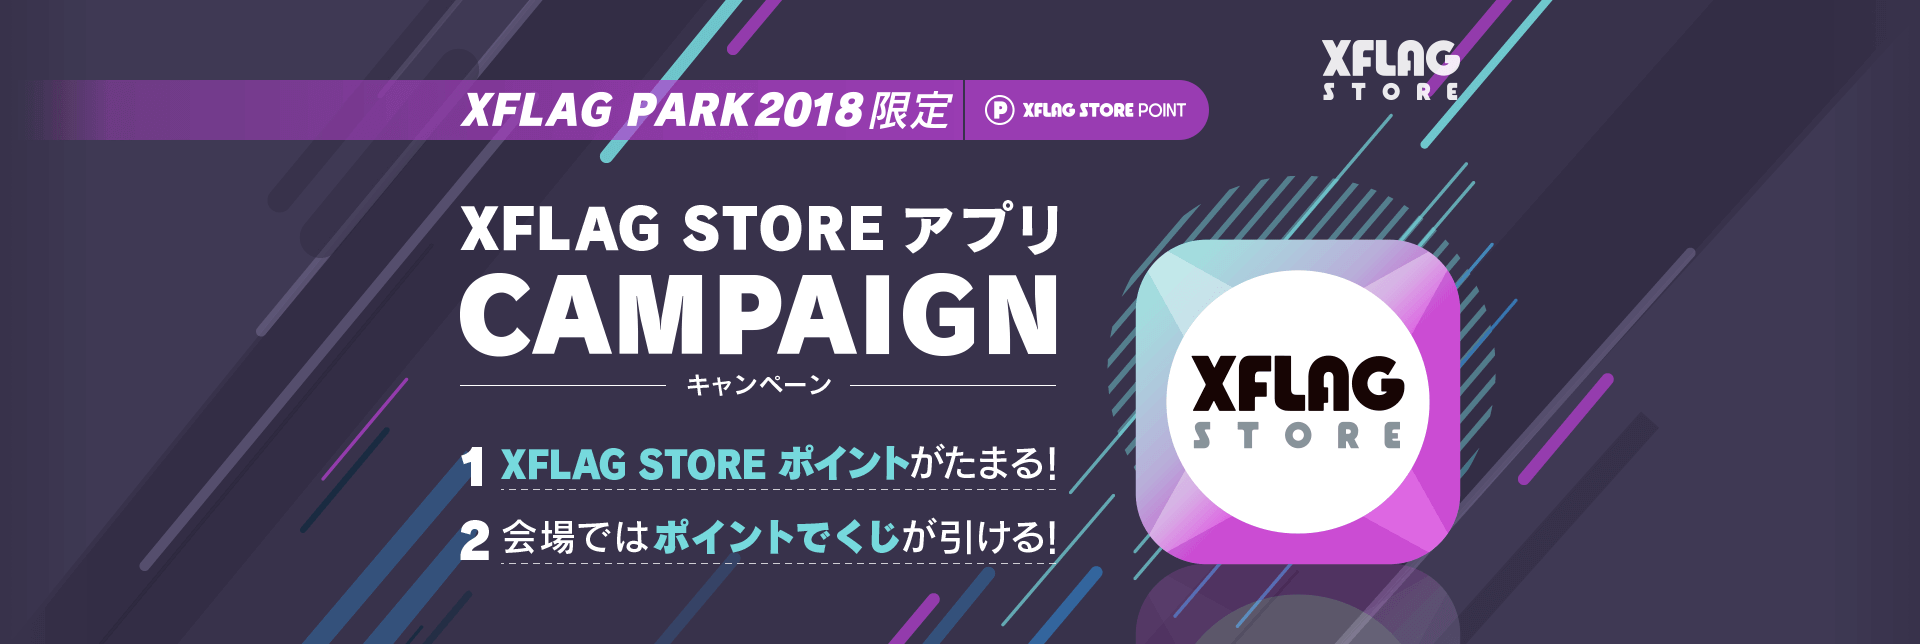 XFLAG STORE アプリ CAMPAIGN